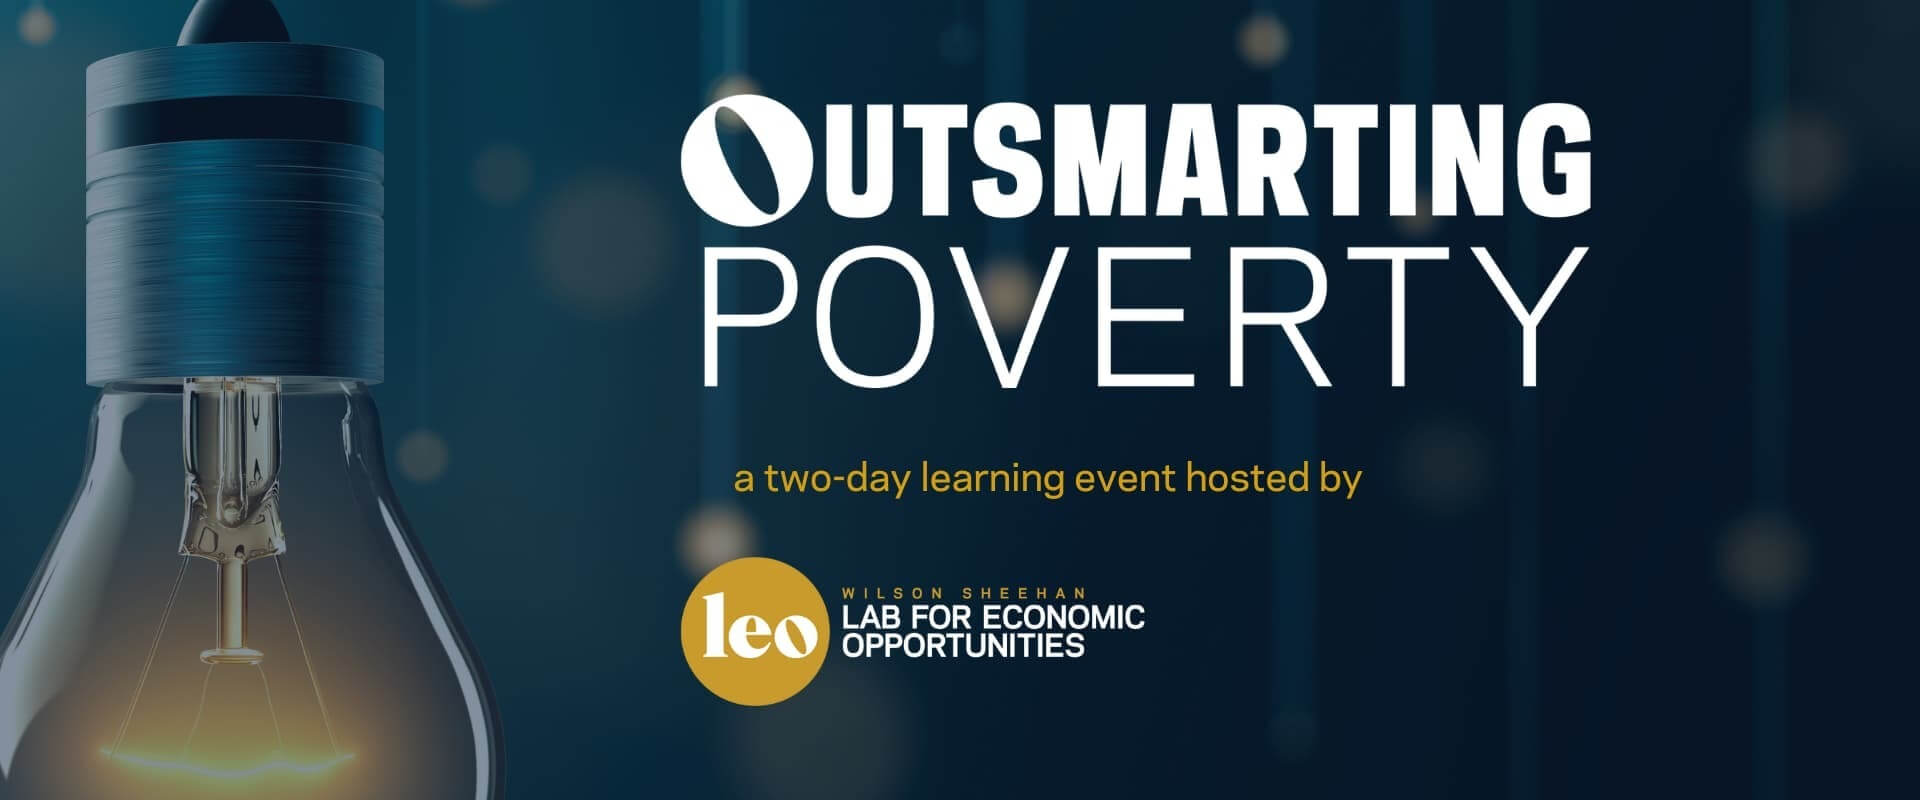 Outsmarting Poverty Event Site Header Final 1920 800 Px